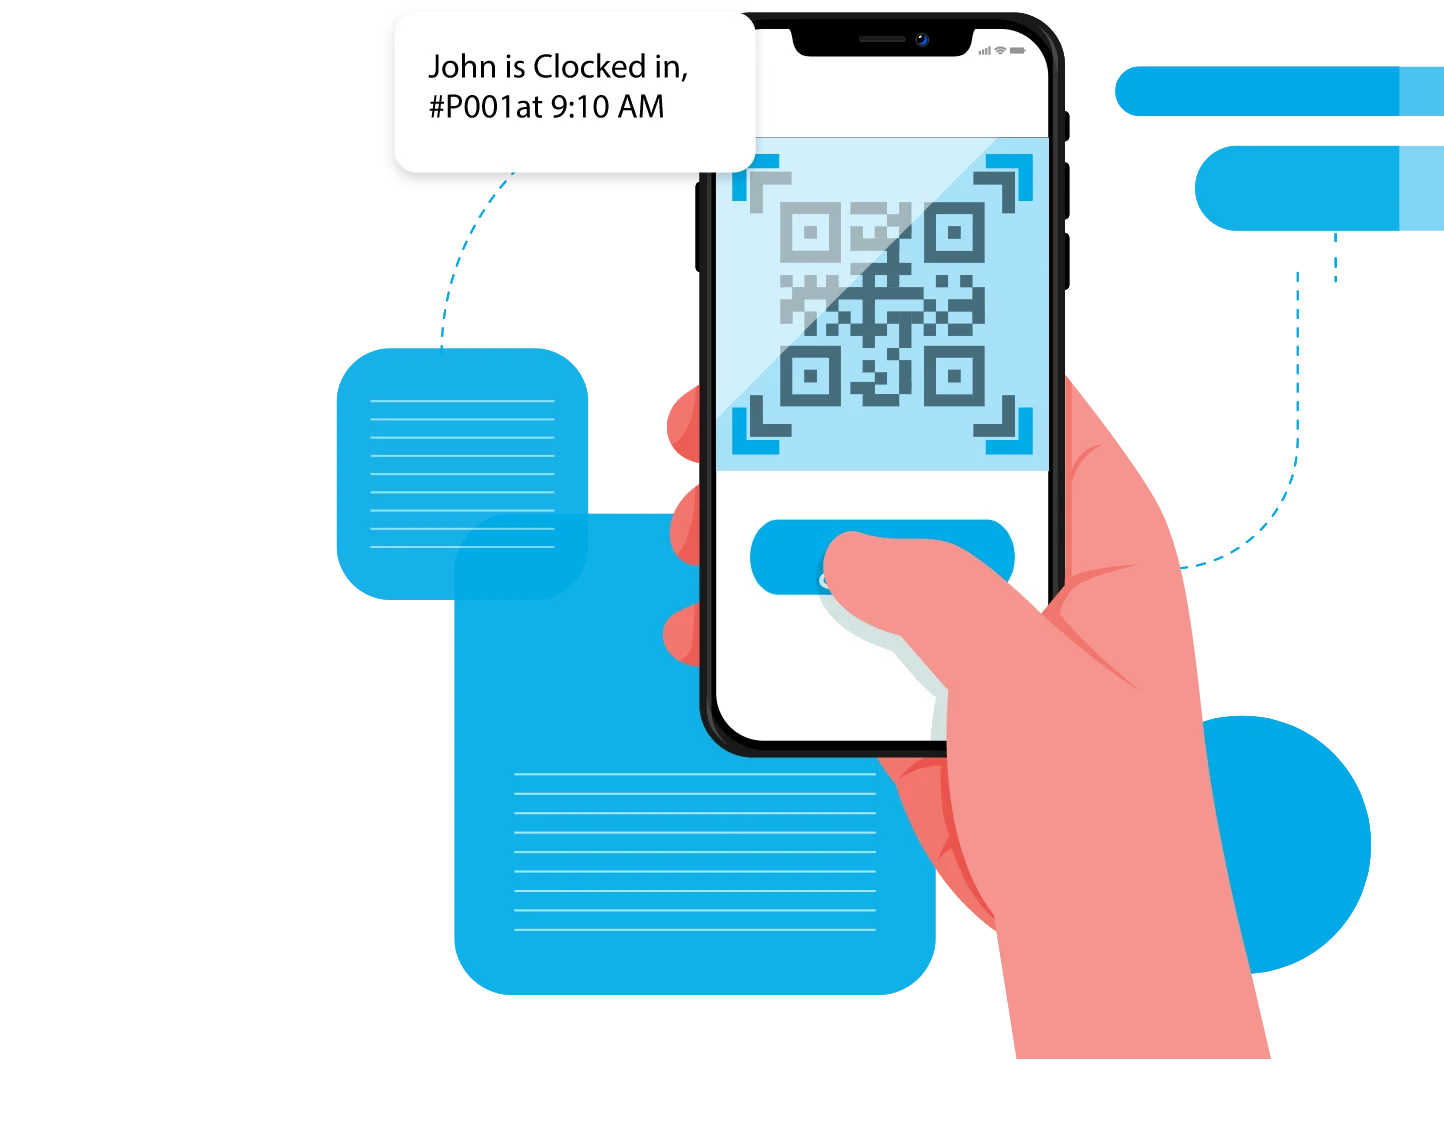 QR Code and Barcode Scanner